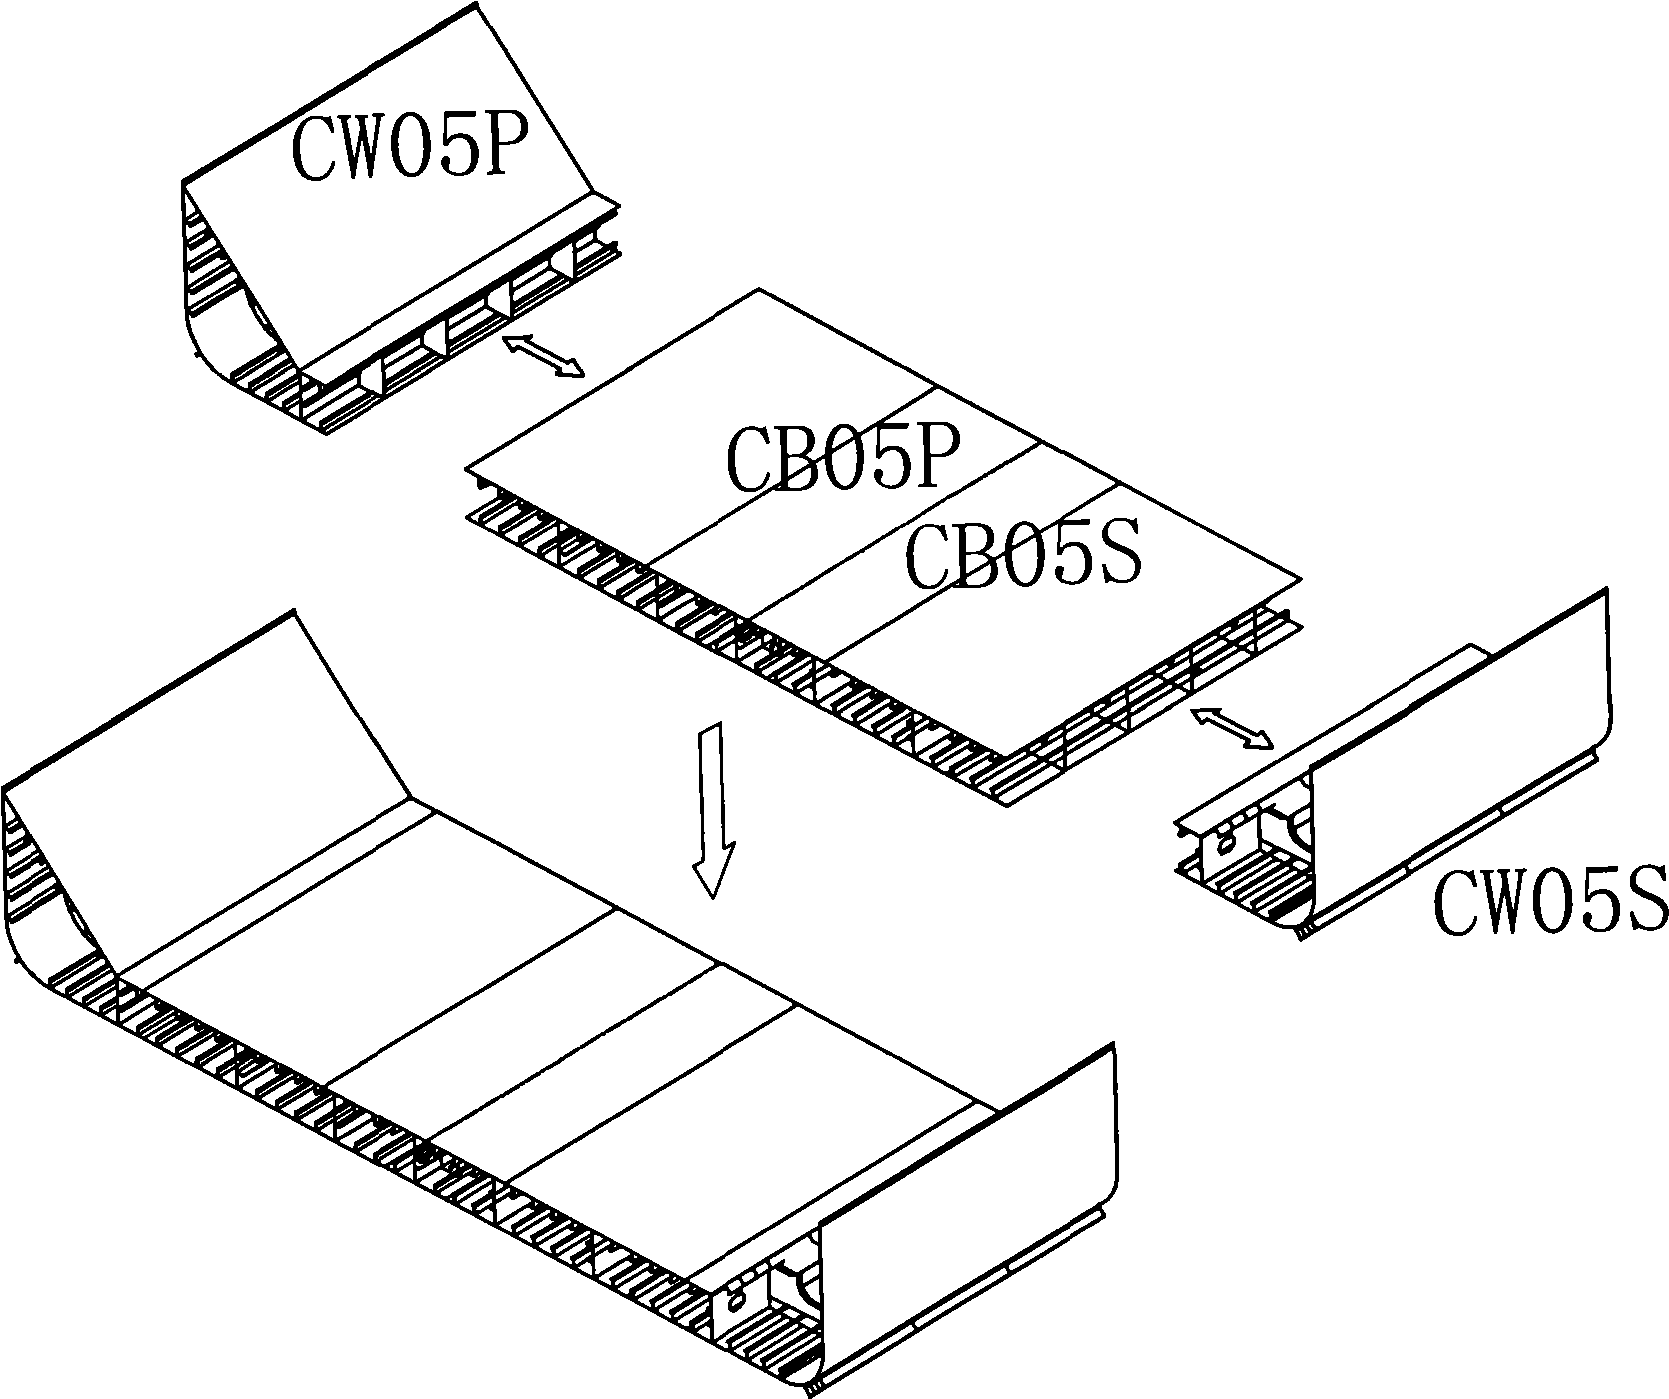 Method for half-breadth double-span total assembling and building in shipbuilding